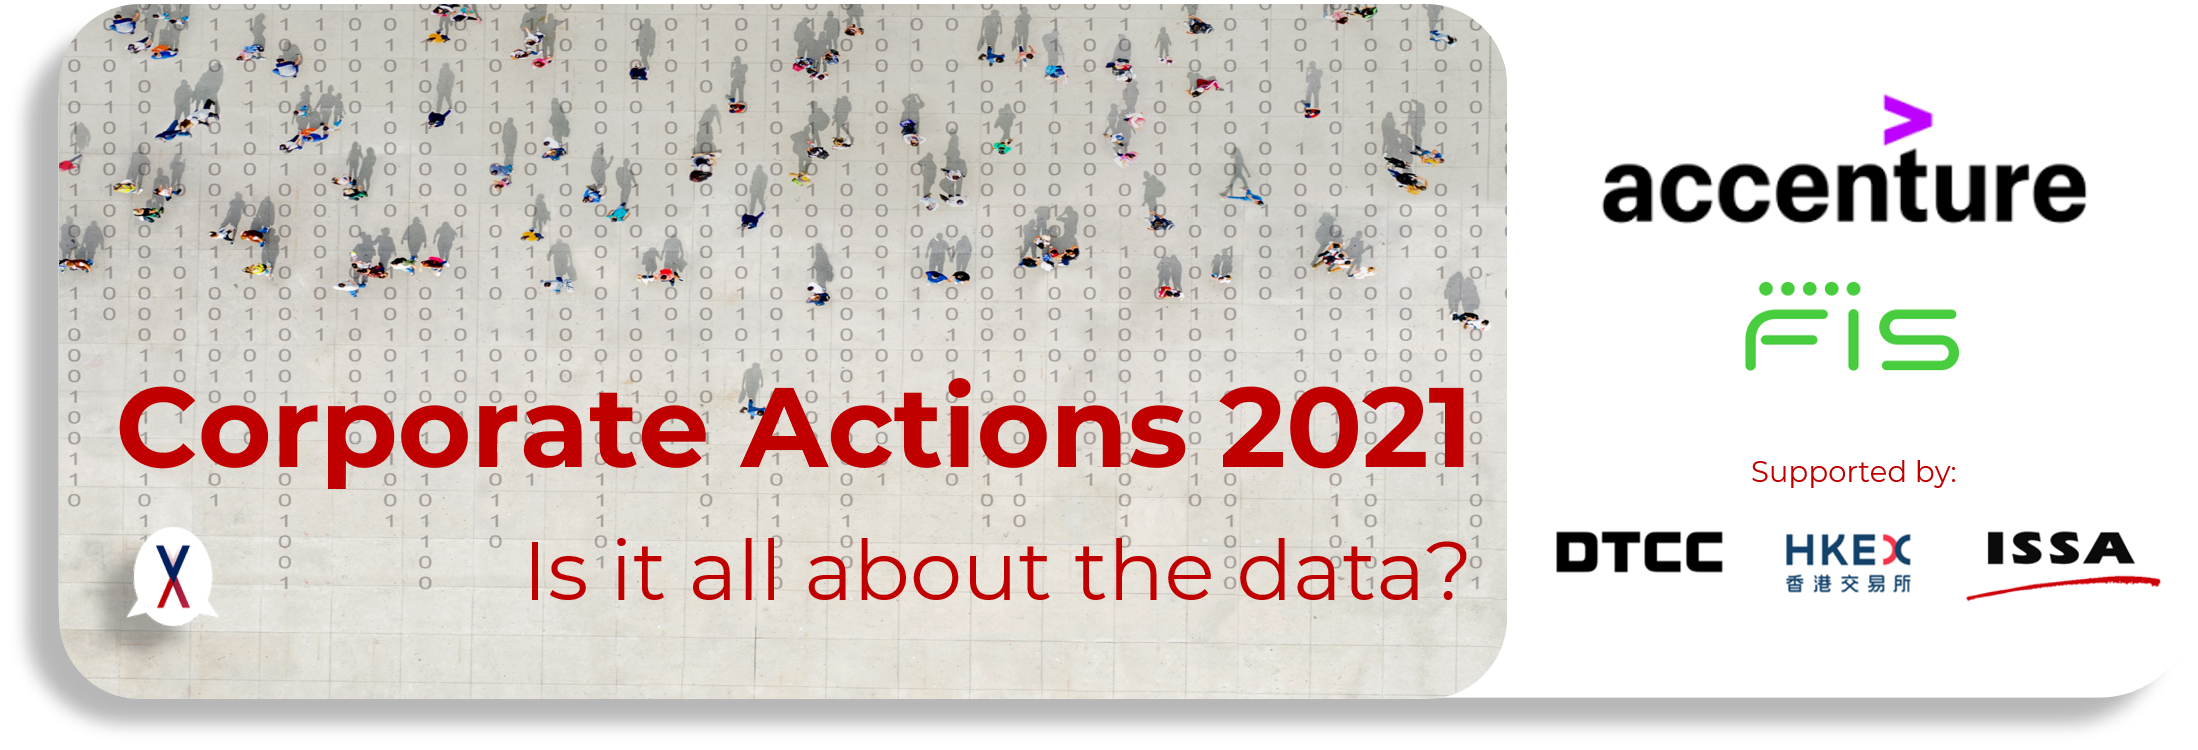 Corporate Acton 2021: Is it all about the data